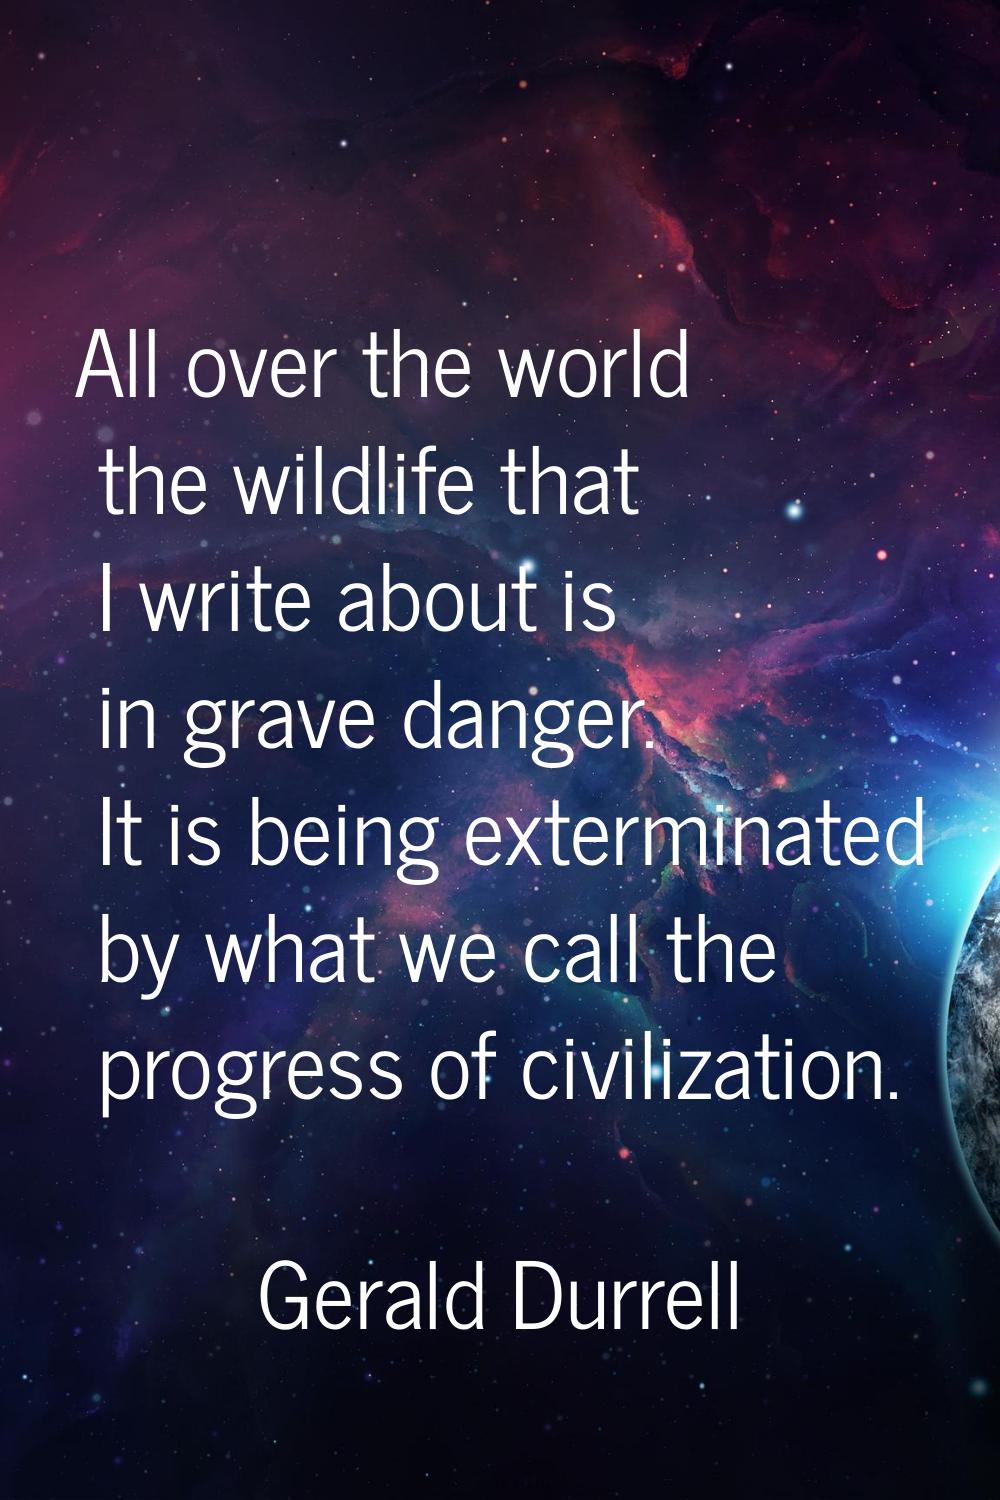 All over the world the wildlife that I write about is in grave danger. It is being exterminated by 